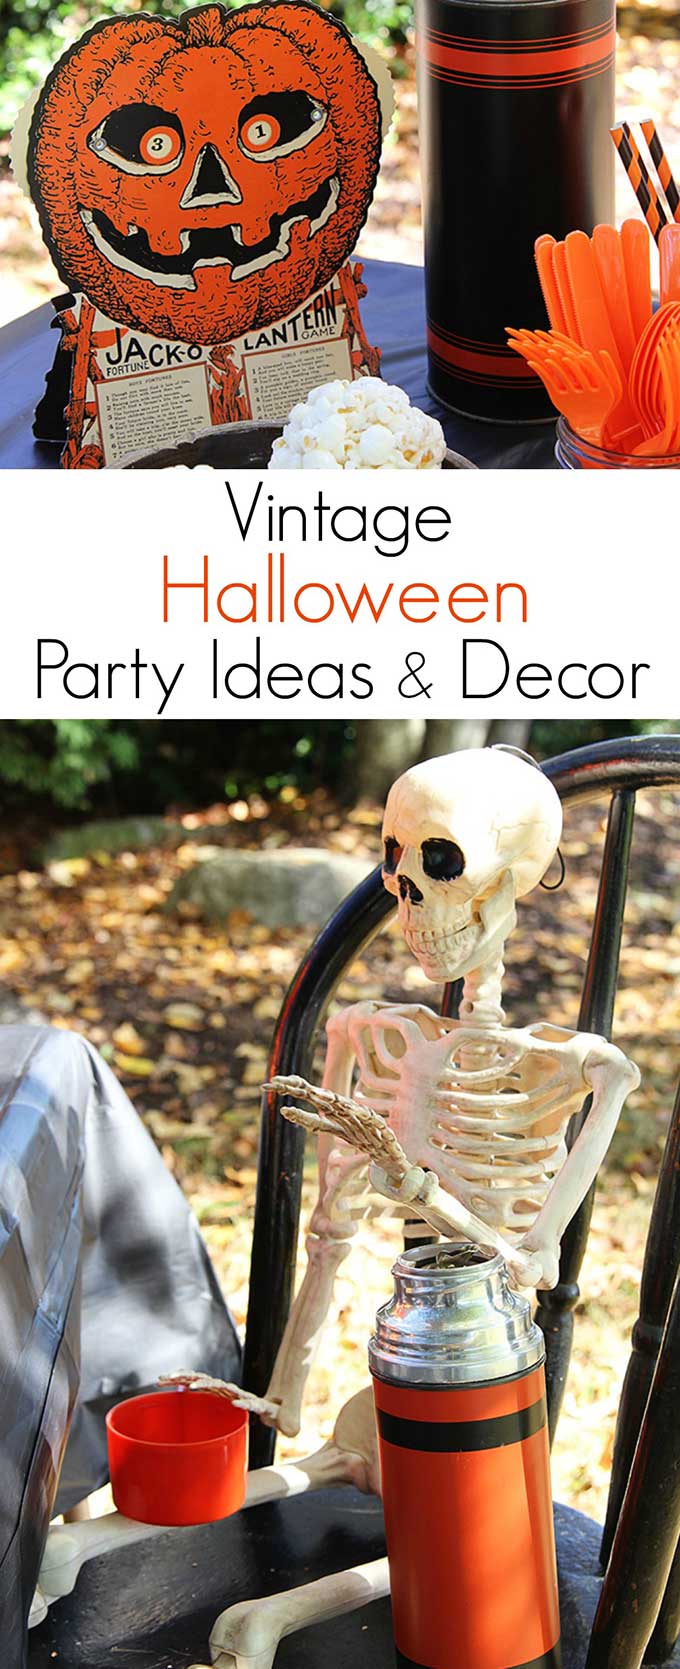 A traditional Halloween party with orange and black decor including blow molds and vintage inspired Halloween decorations.